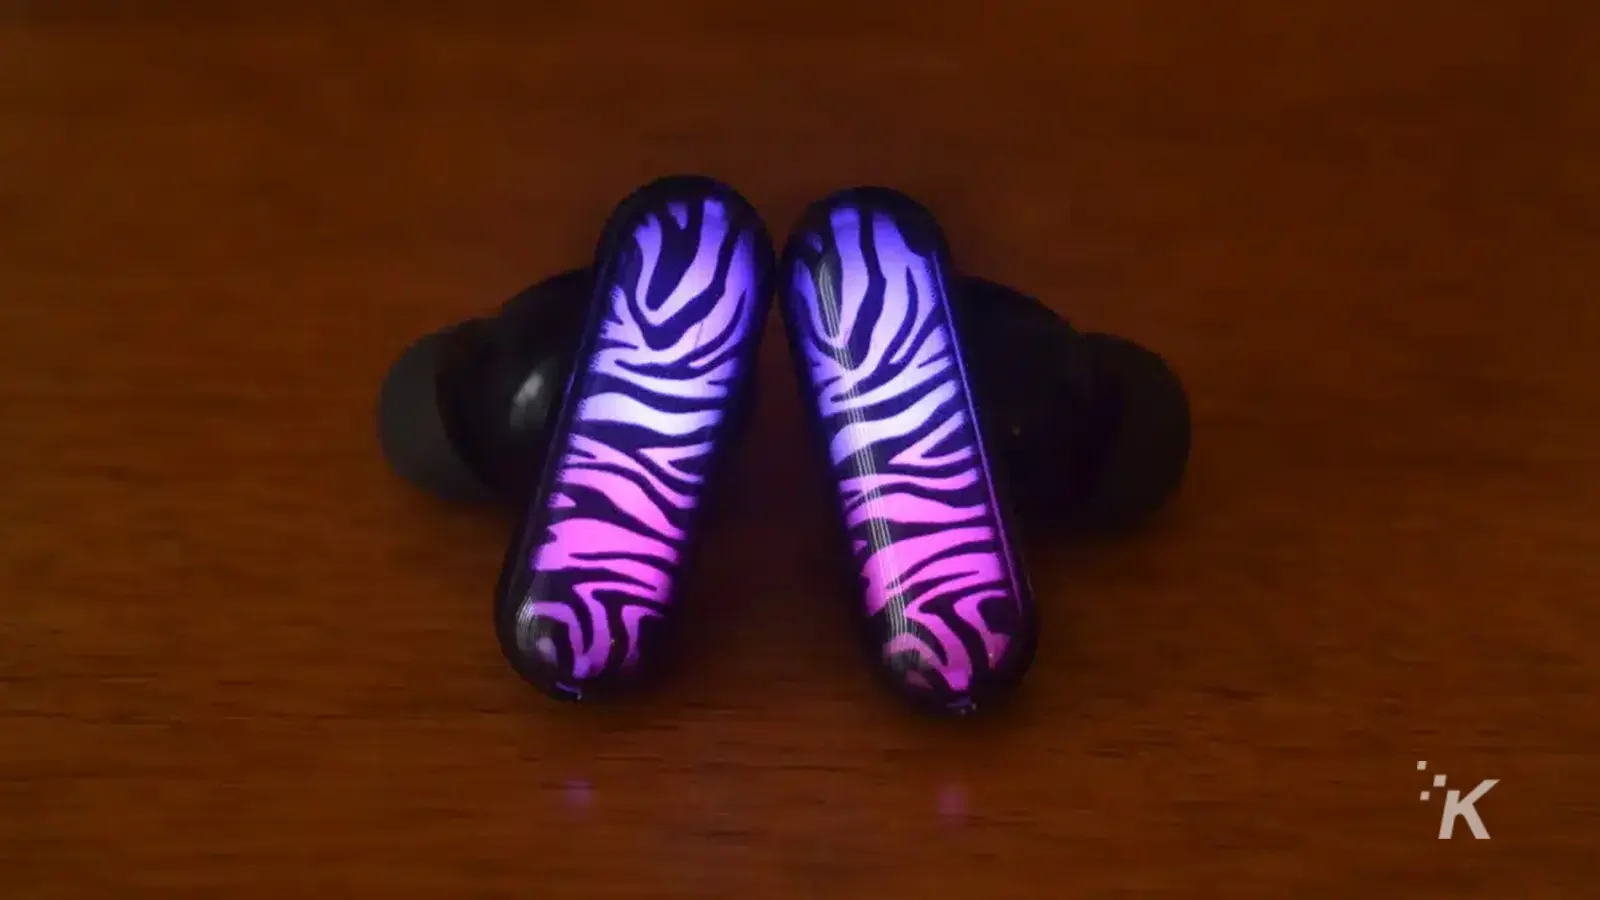 GPods earbuds purple zebra led on wooden table